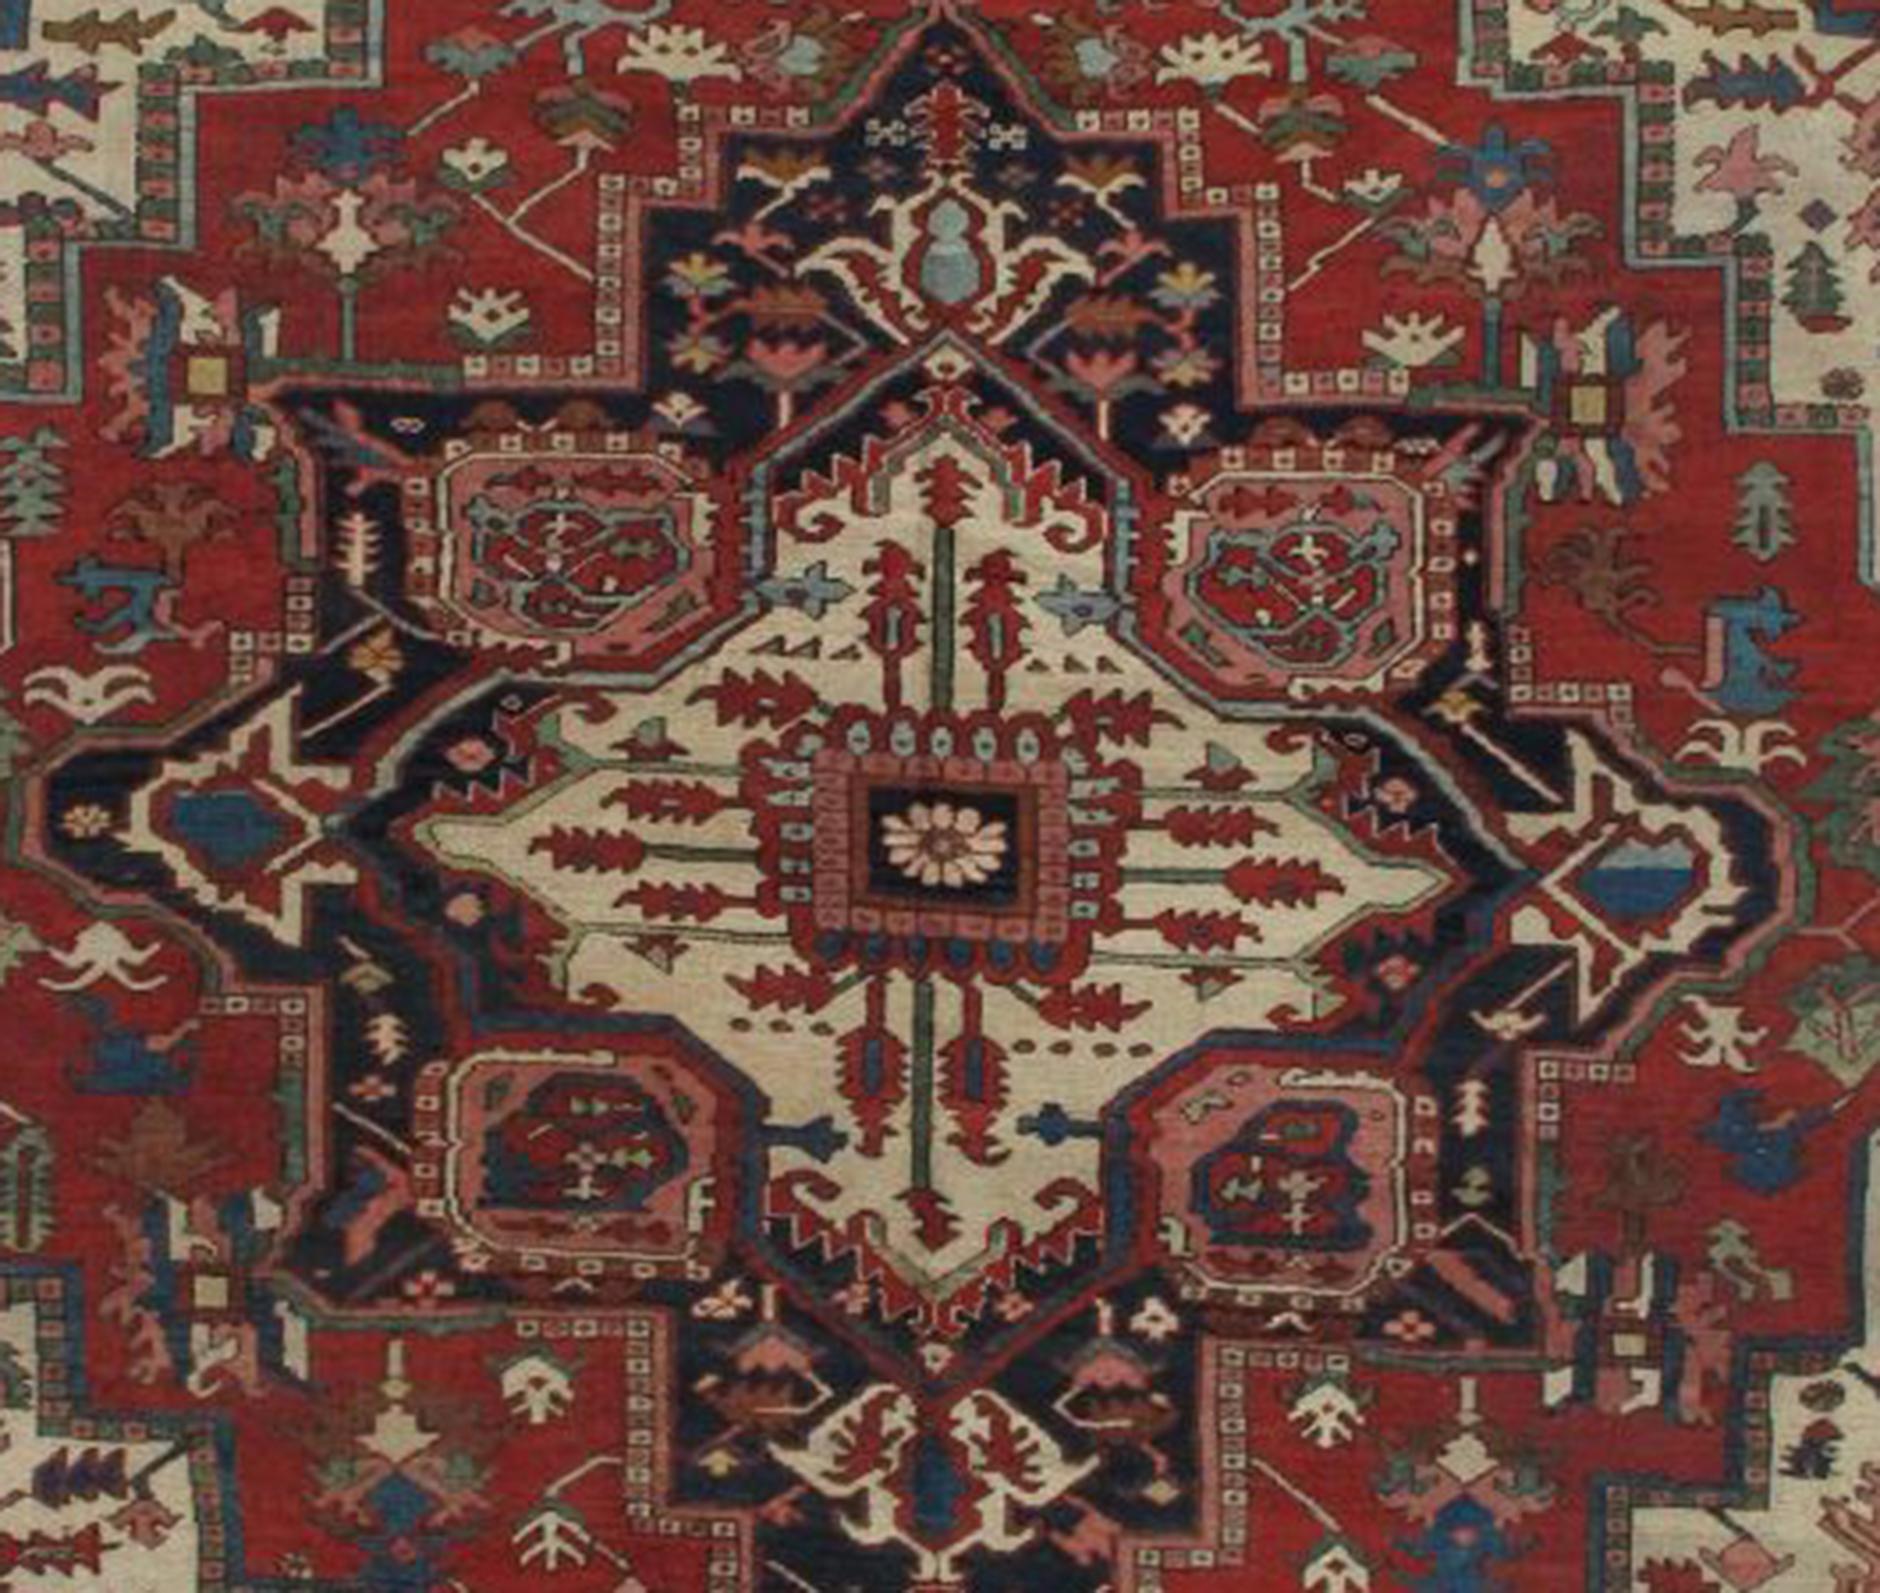 Antique Handsome Serapi Carpet, Handmade Wool Carpet Red Navy, Light Blue, Ivory In Good Condition For Sale In Port Washington, NY